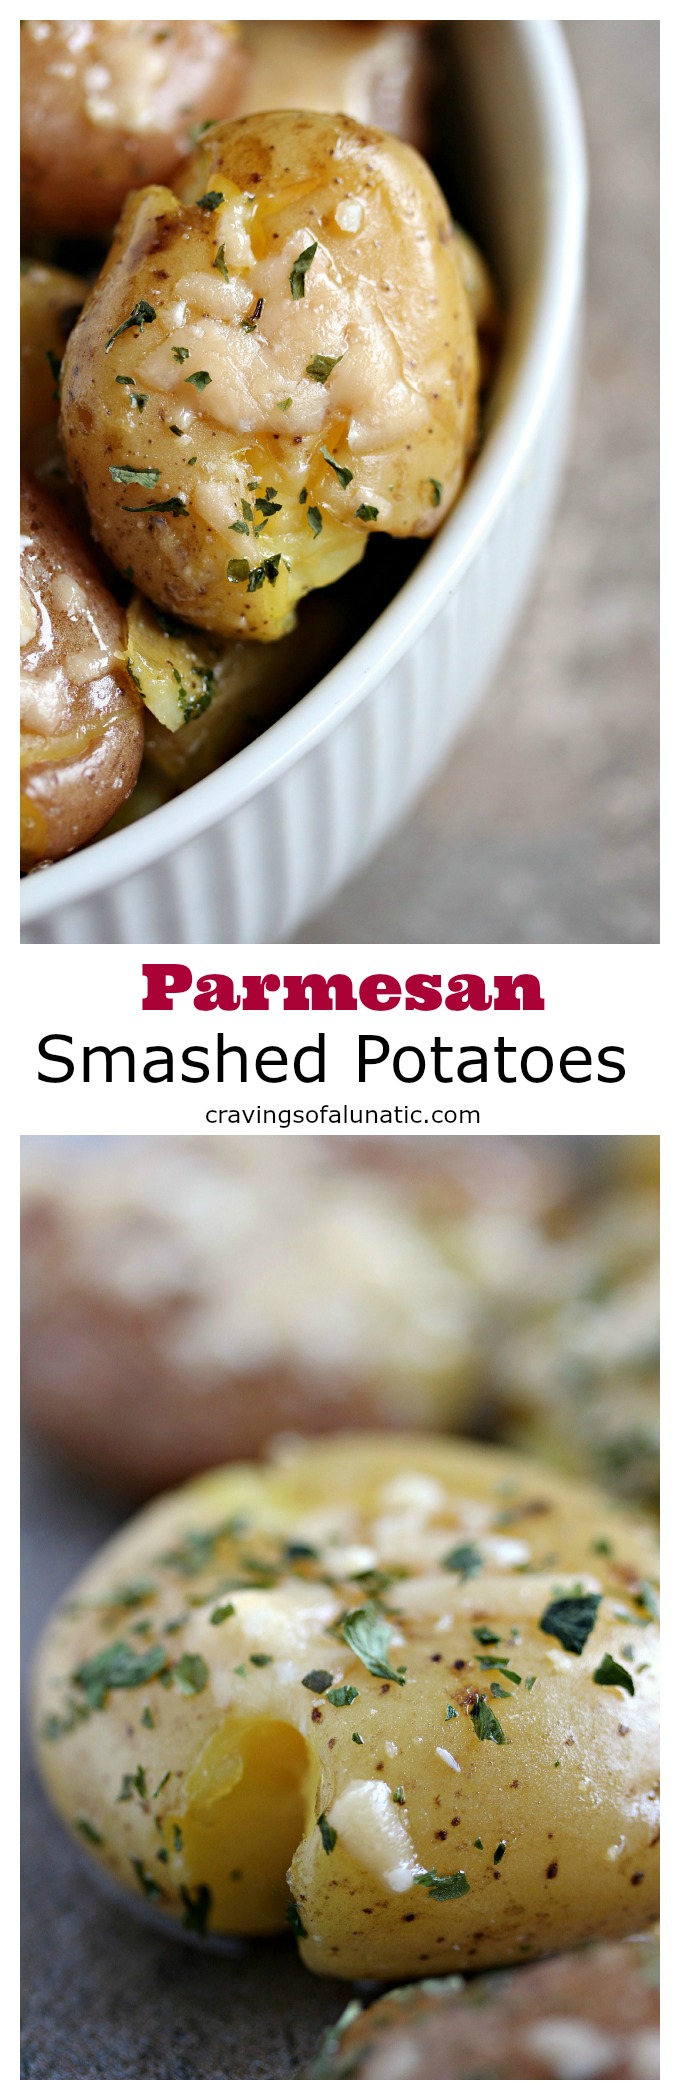 Parmesan Smashed Potatoes from cravingsofalunatic.com- Parmesan smashed potatoes are a family favourite in our household. They're a great alternative to mashed potatoes for the holidays, or all year long. (@CravingsLunatic)